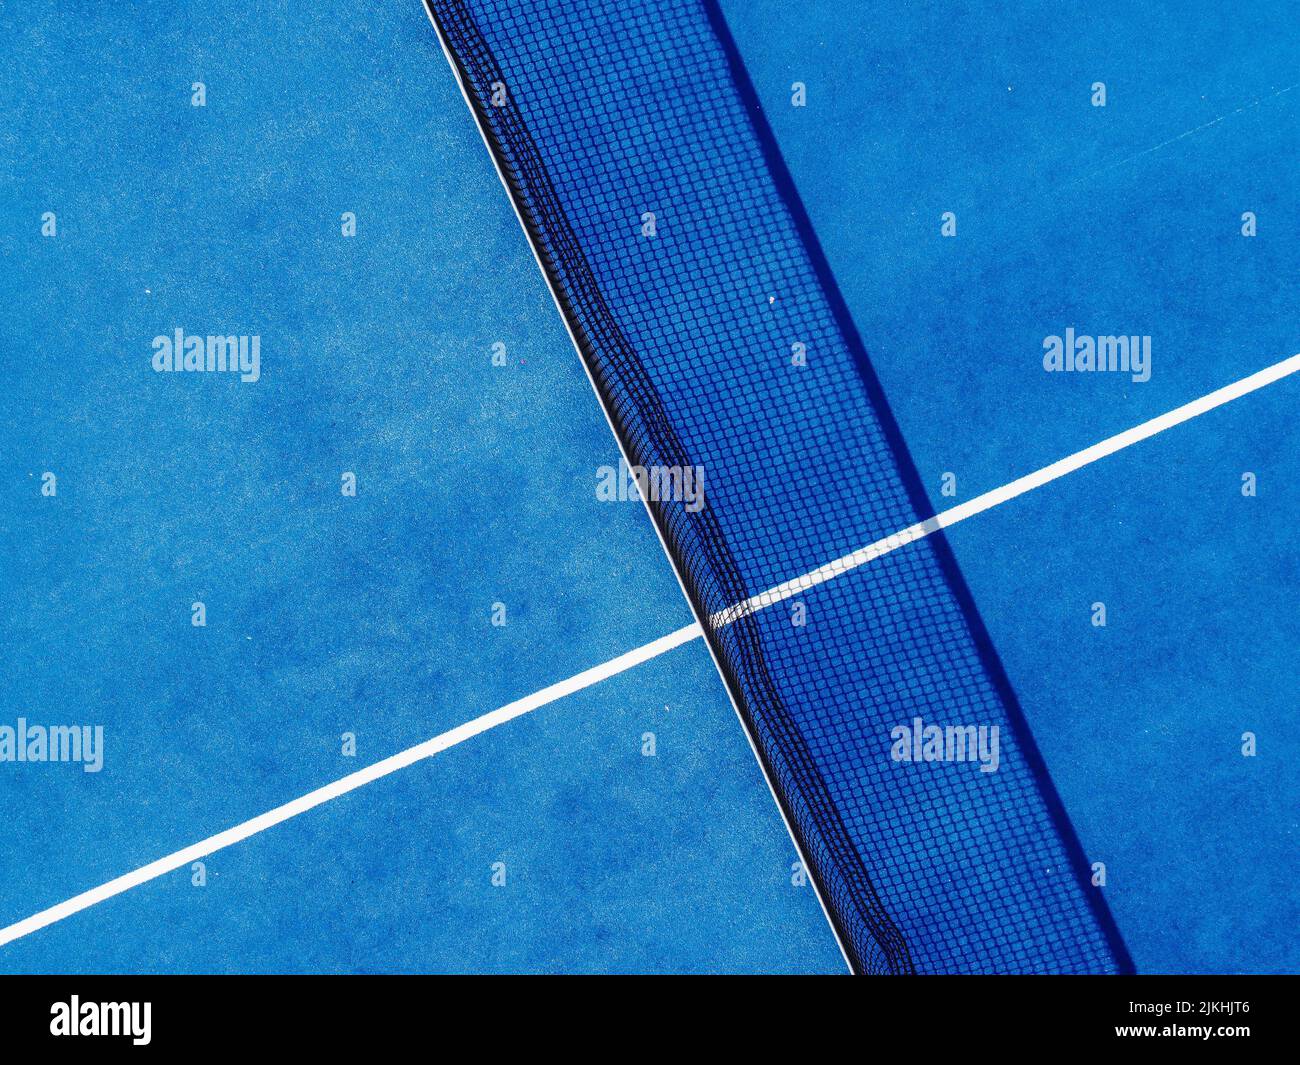 Aerial drone view of blue paddle tennis court Stock Photo